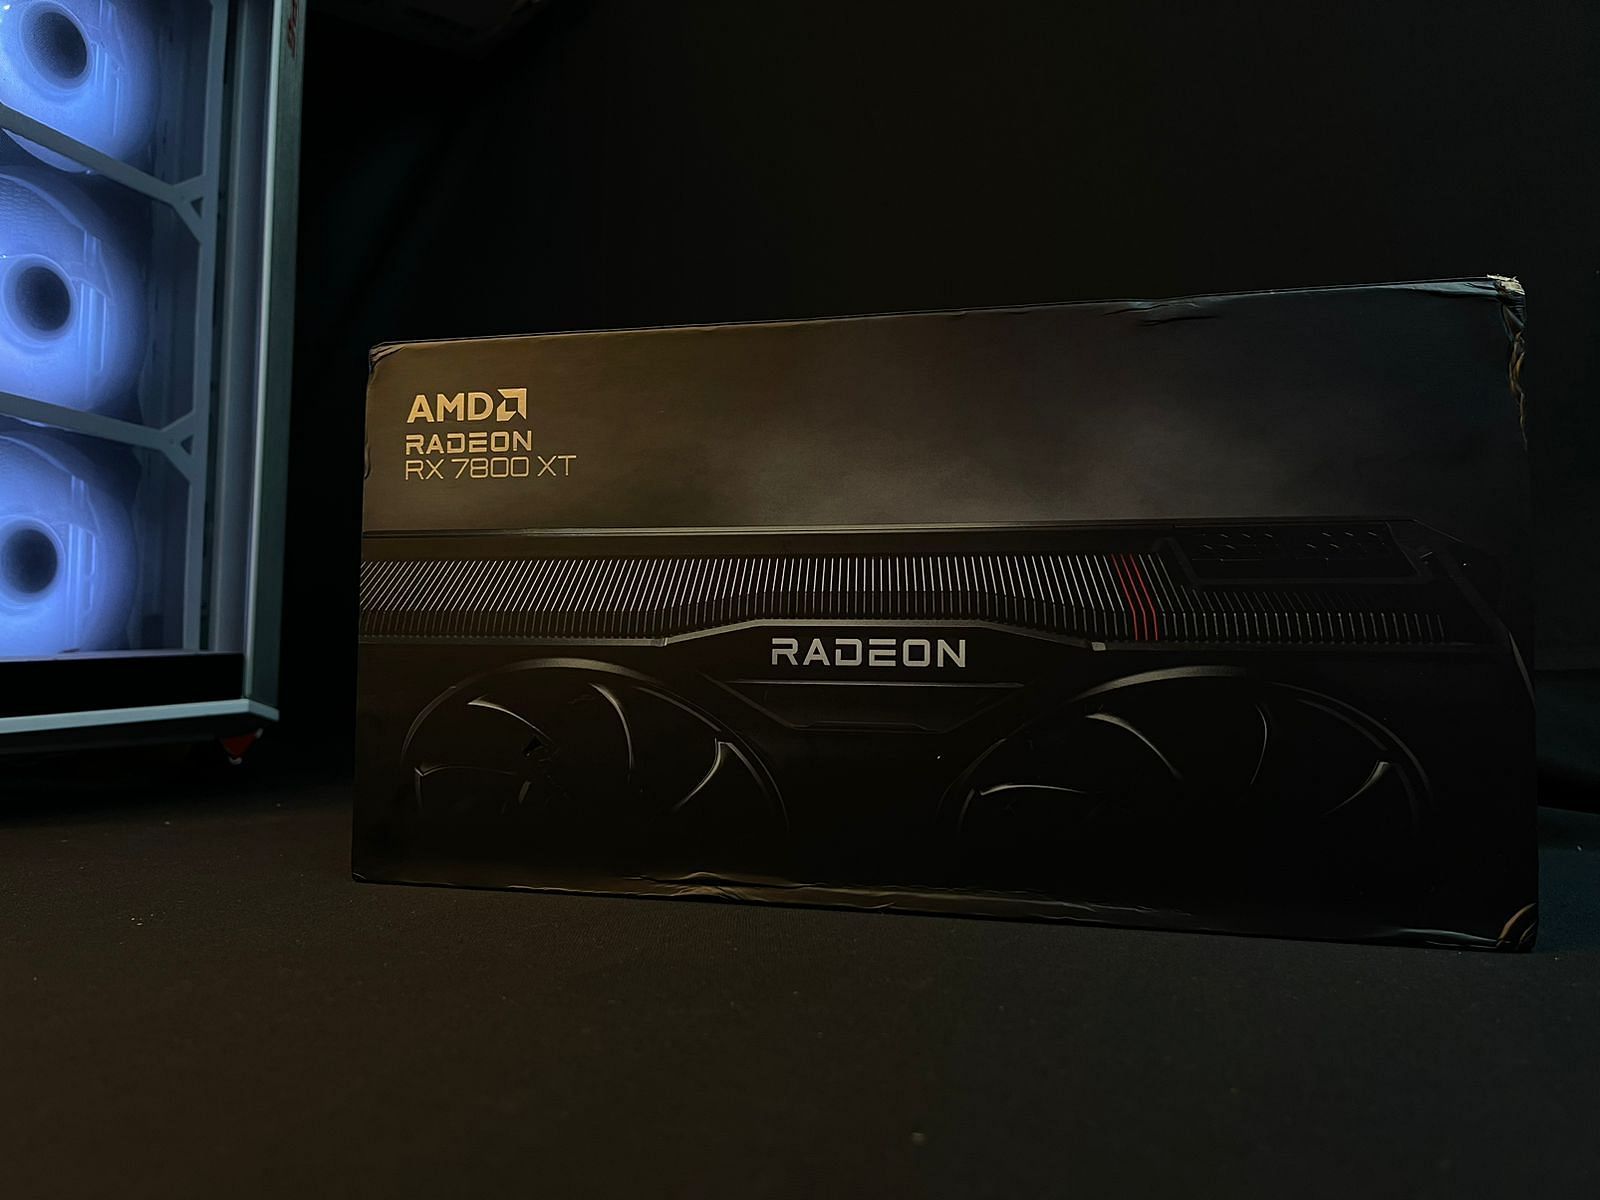 The retail packaging of the reference design AMD Radeon RX 7800 XT (Image via Sportskeeda)